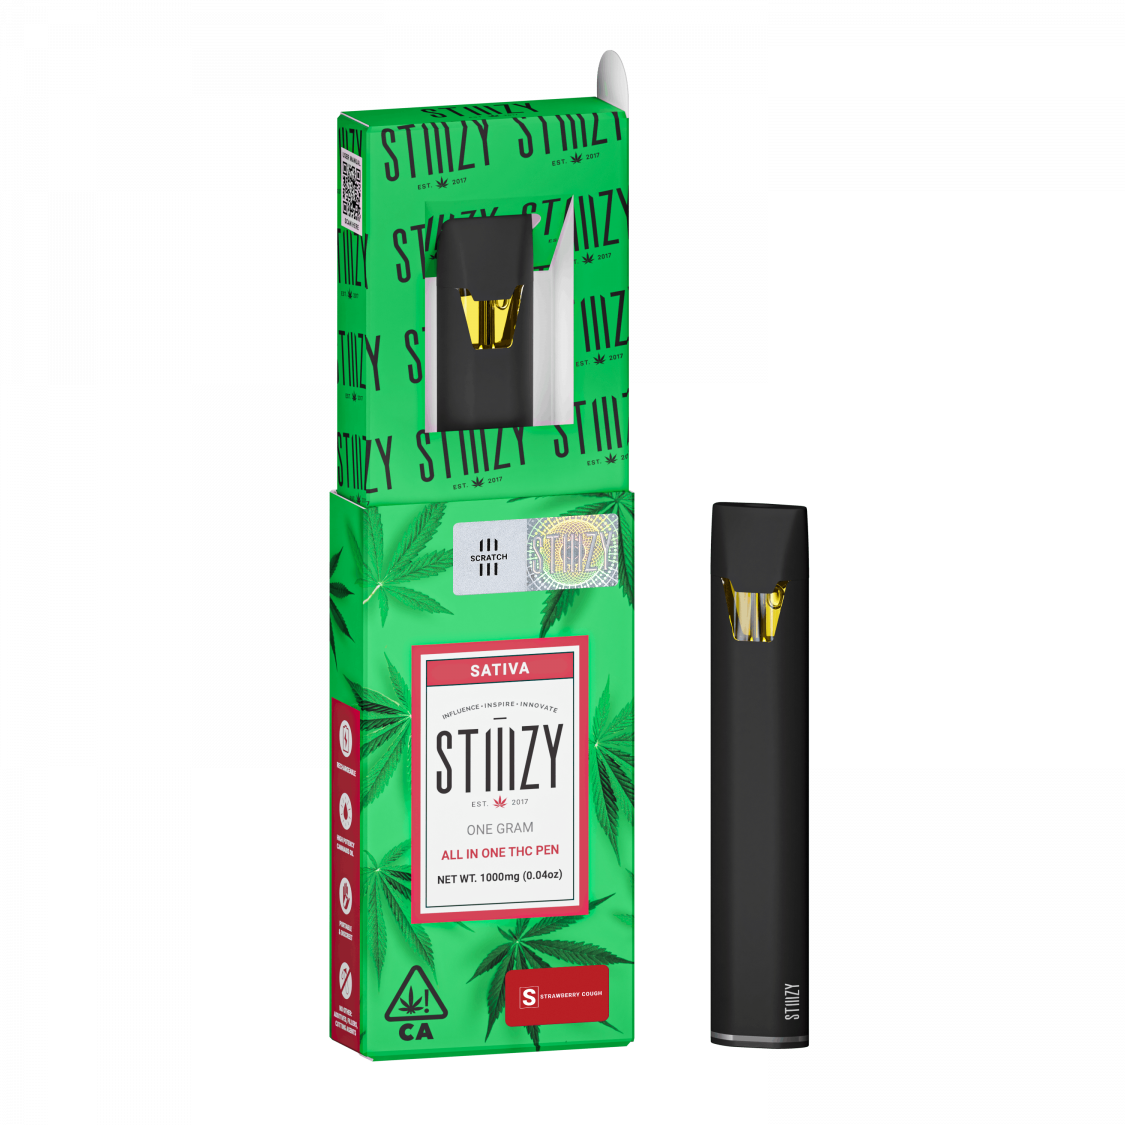 STIIIZY Strawberry Cough All-In-One THC Pen Vaporizers Disposable